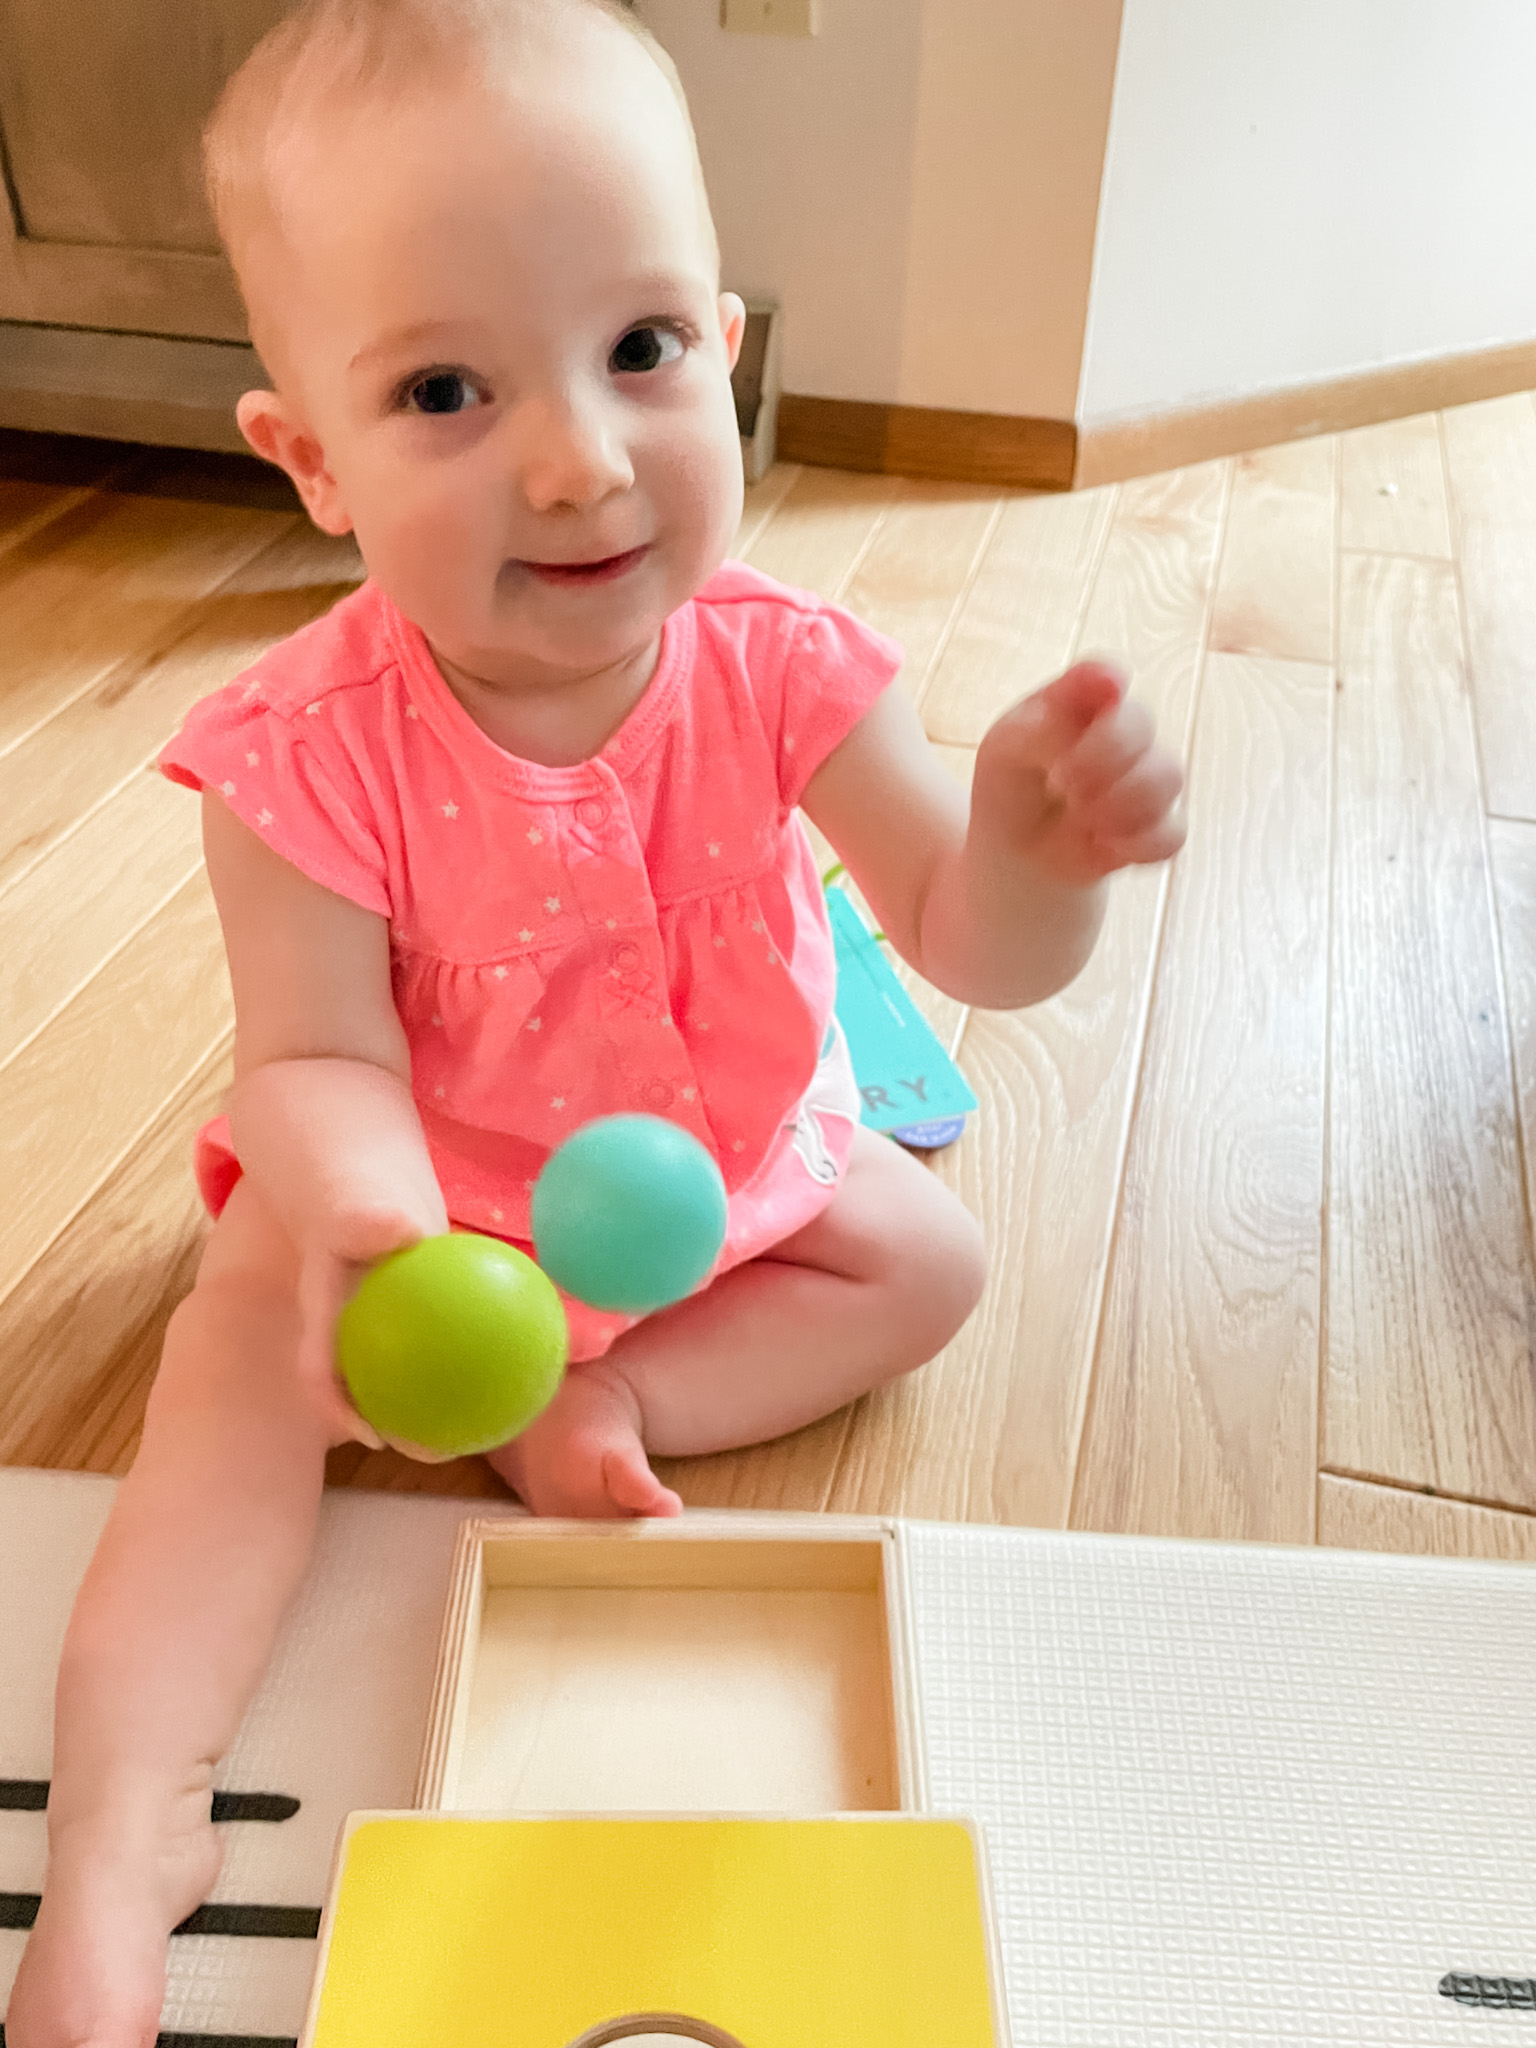 Playing is learning: Here’s what to look for in your child’s toys